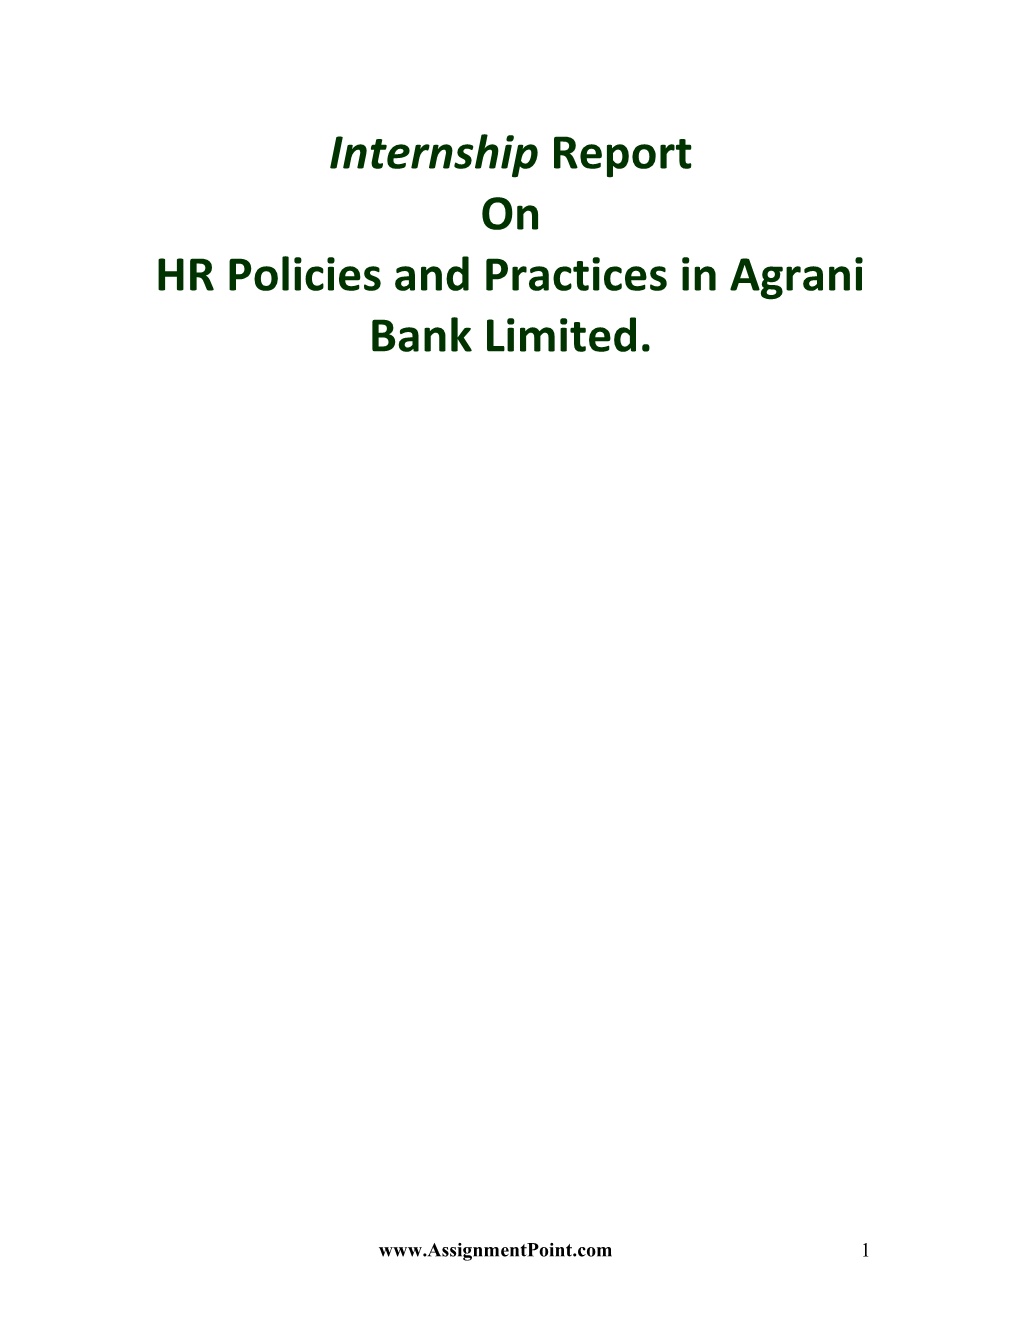 HR Policies and Practices in Agrani Bank Limited